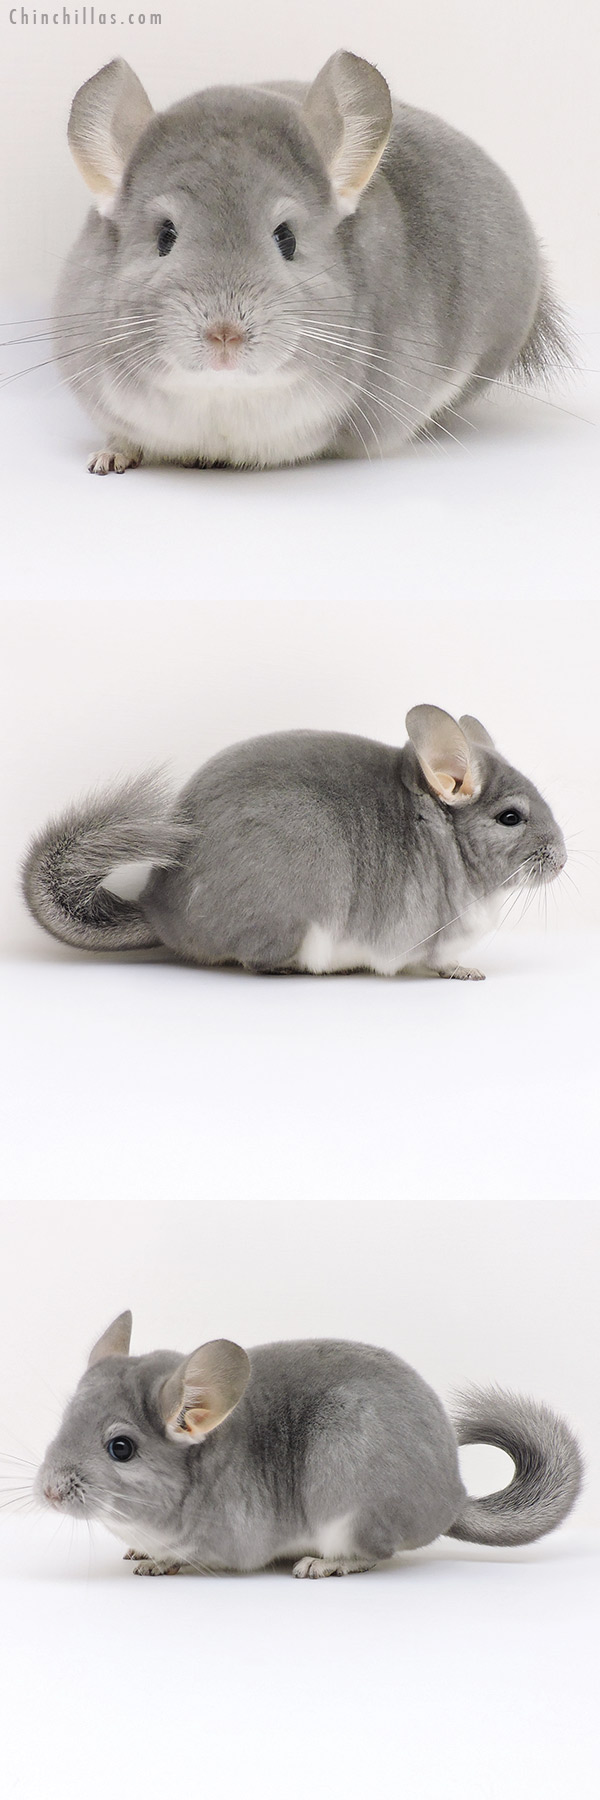 Chinchilla or related item offered for sale or export on Chinchillas.com - 17194 Premium Production Quality Blue Diamond Female Chinchilla